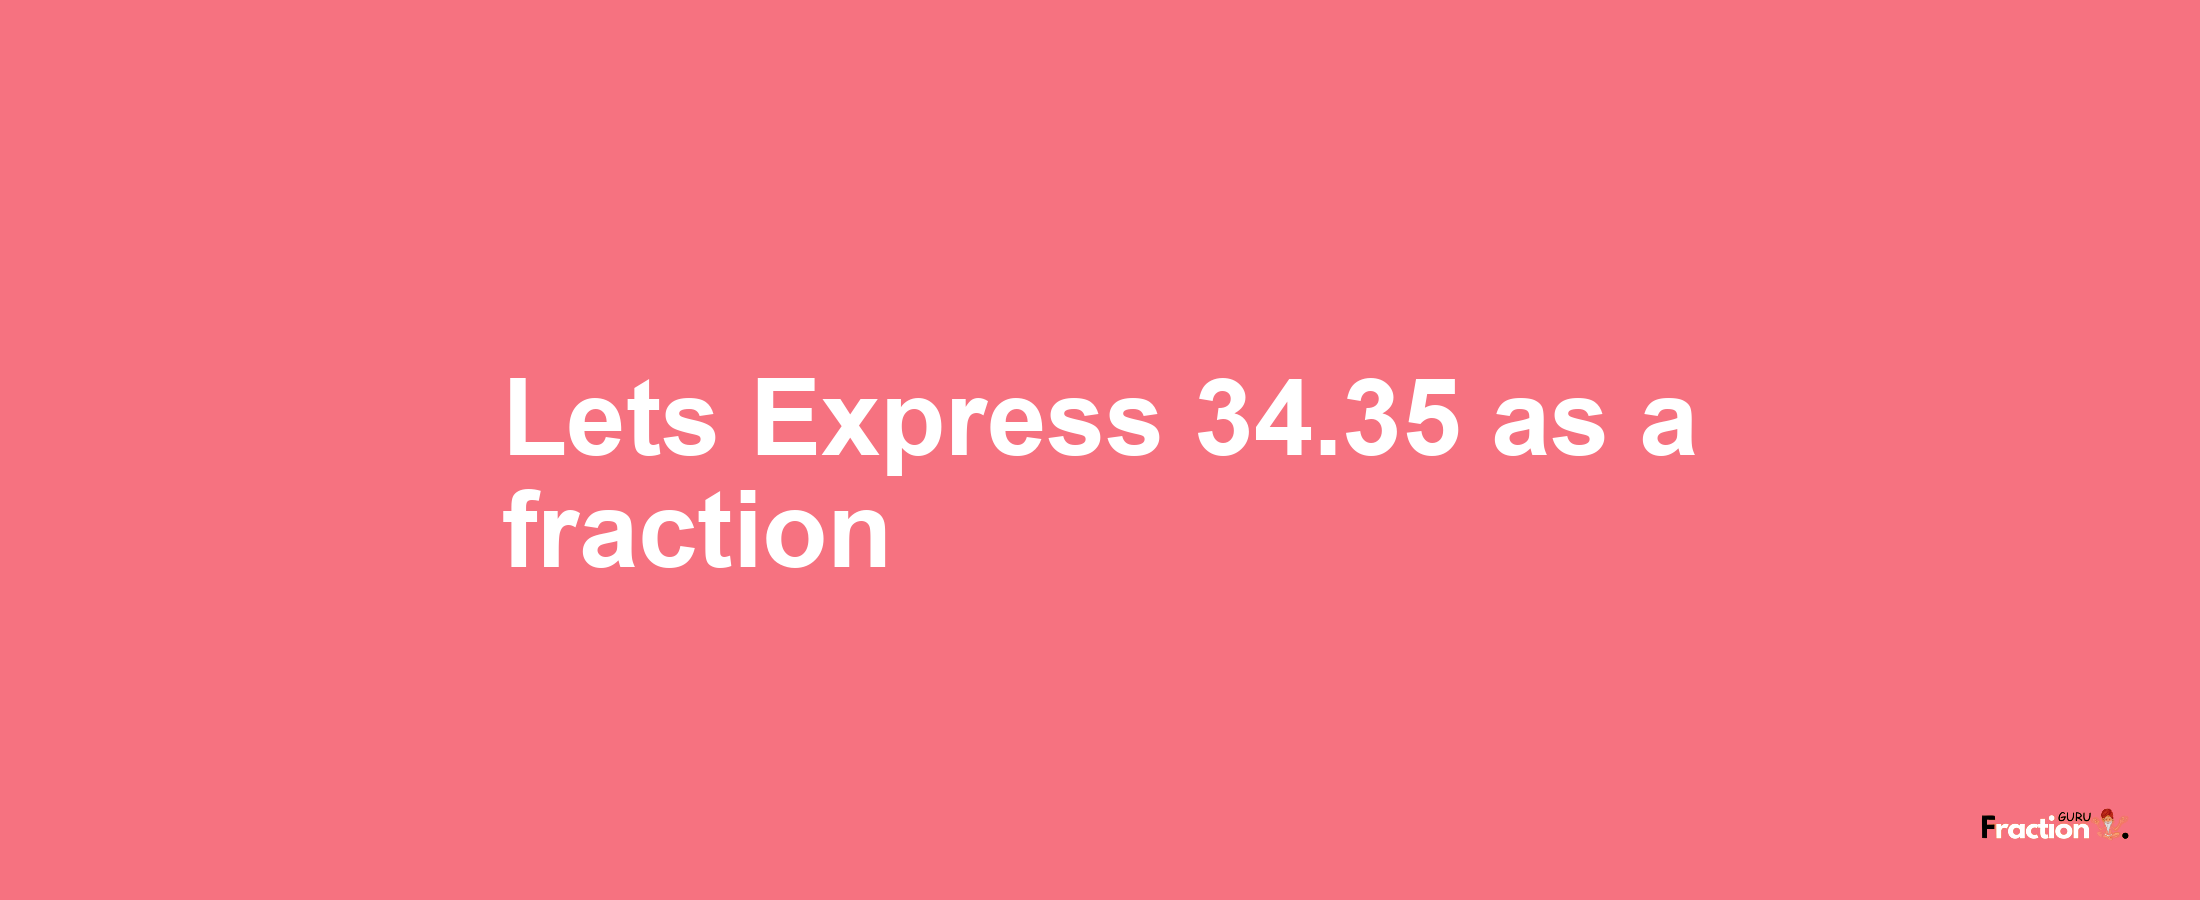 Lets Express 34.35 as afraction